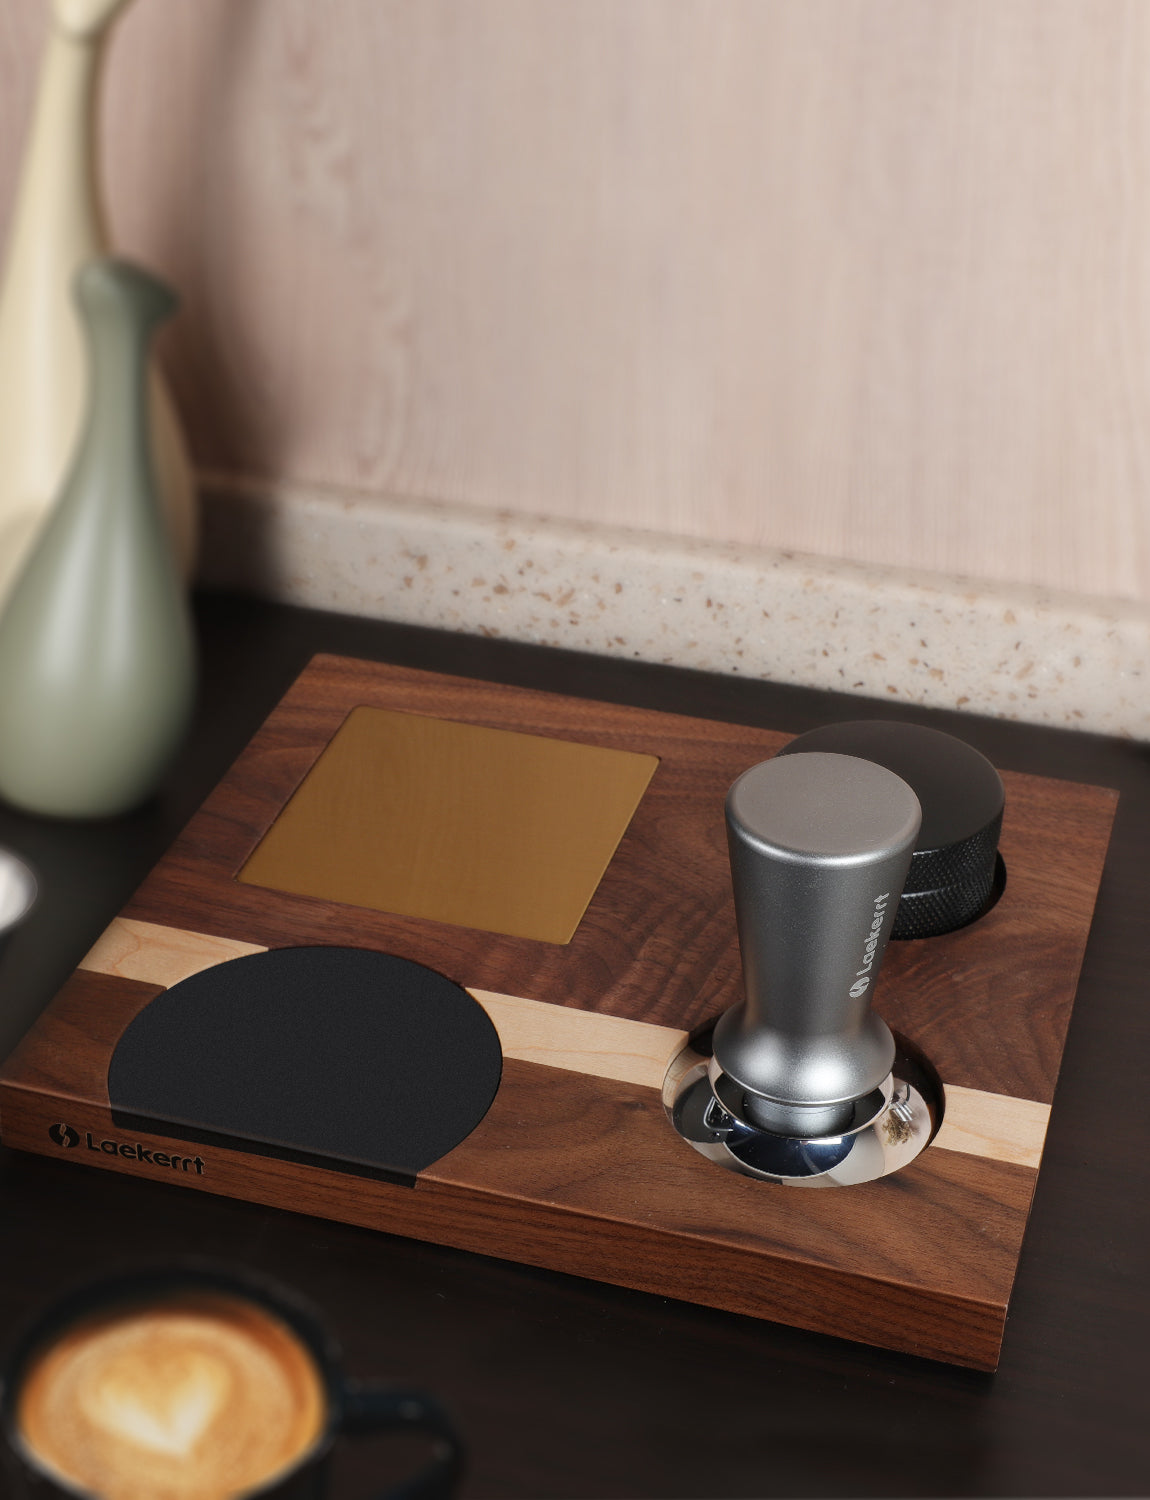 Laekerrt Espresso Tamping Station, Coffee Tamping Base, Natural Walnut Wood Coffee Station, Fits All Espresso 51mm-58mm Accessories, with Non-Slip Silicone Tamping Mat, Storage Tamping Shaking 3 IN 1